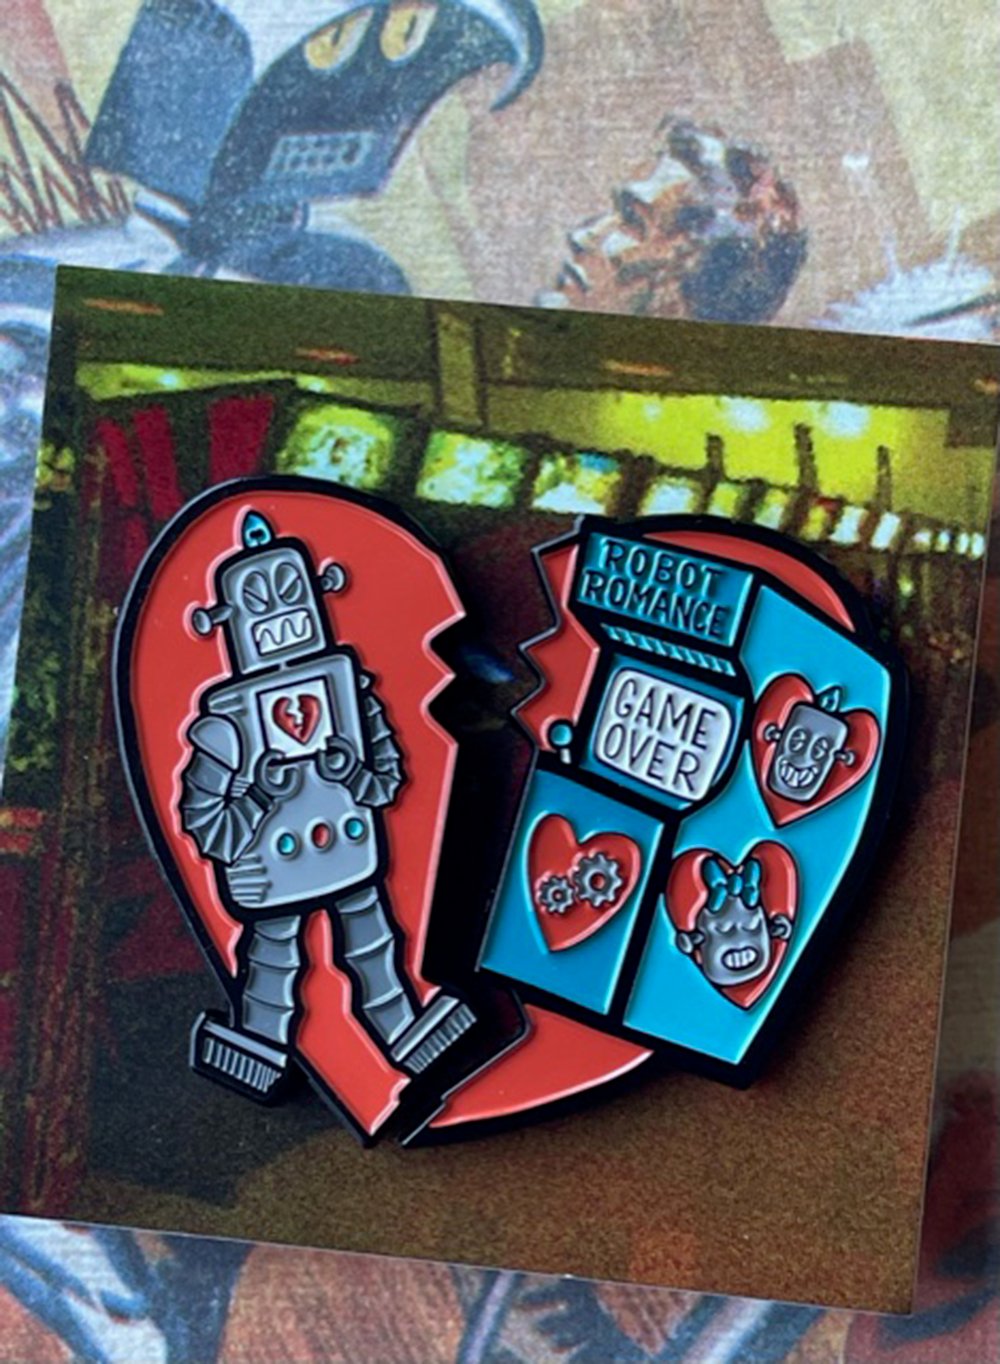 Robot Romance 2-piece 2" Enamel Pin Set! Limited Edition & Hand Numbered